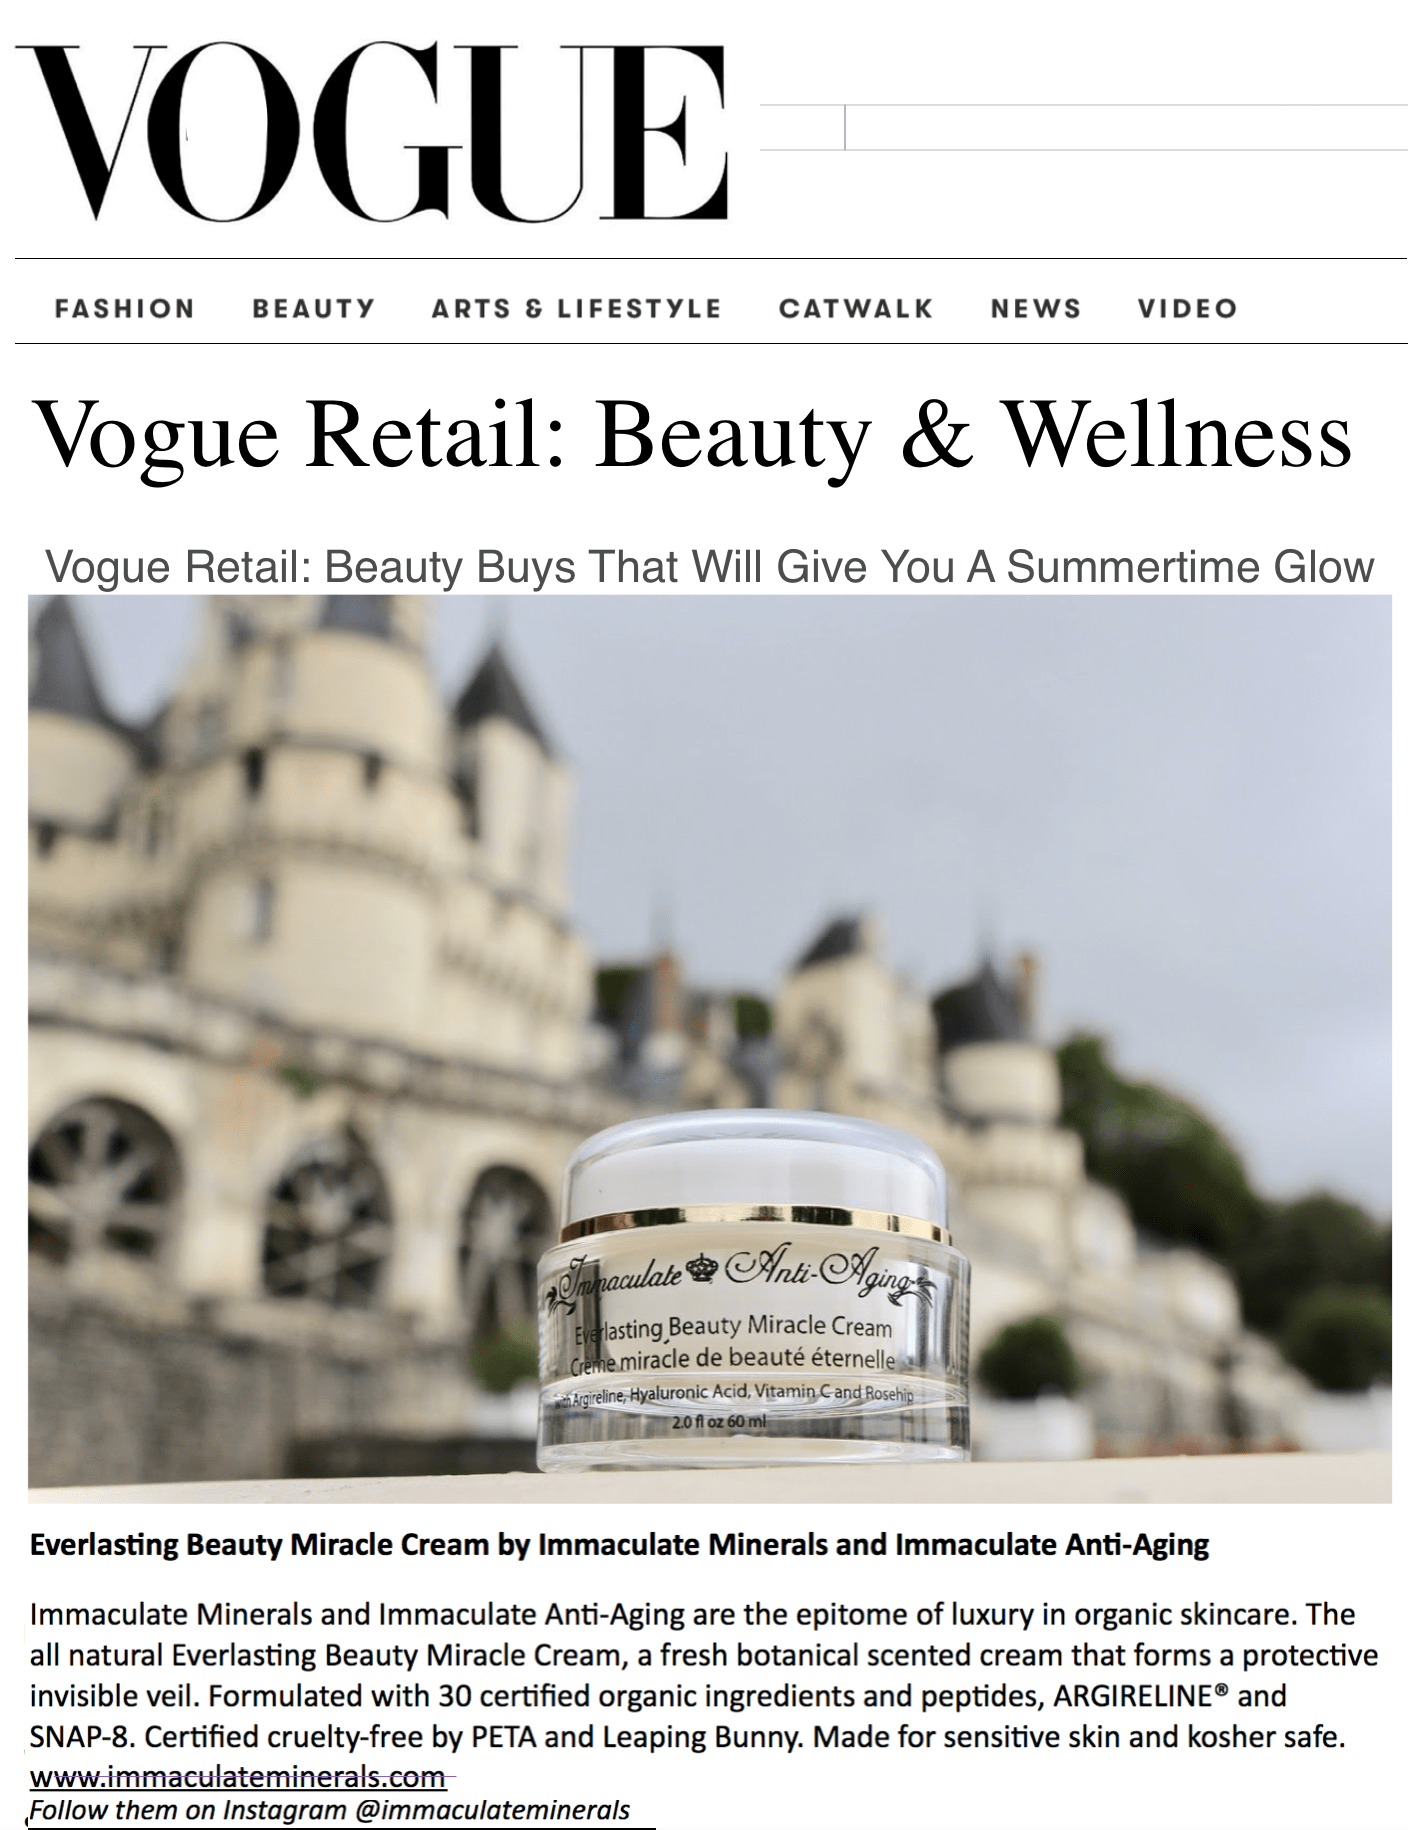 Everlasting Beauty Miracle Cream - In Vogue - Immaculate Anti-Aging®